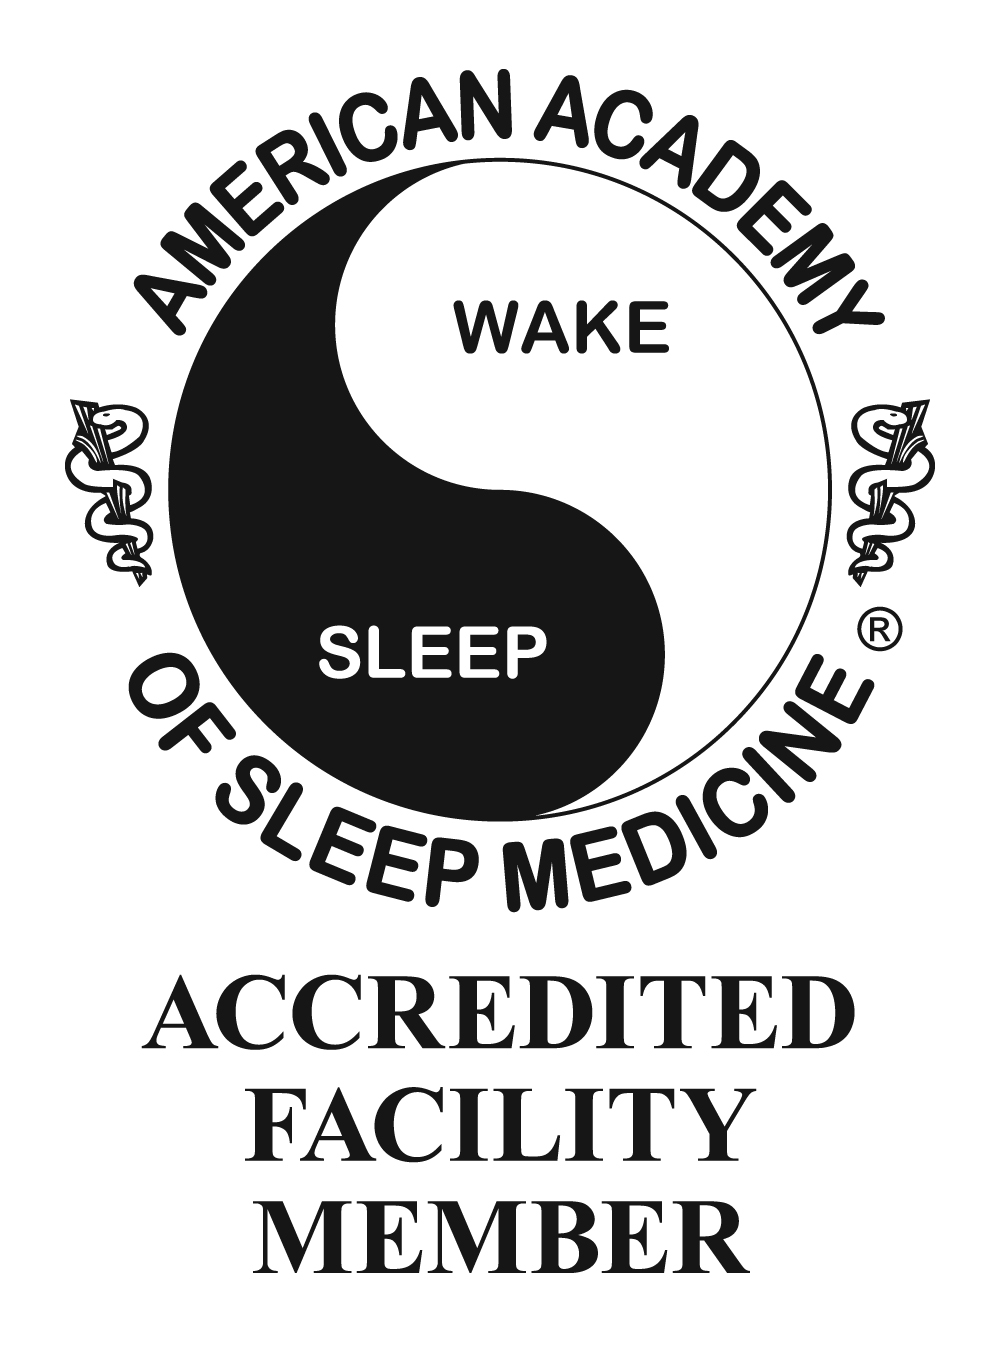 American academy of sleep medicine accredited facility member with a ying yang that says wake and sleep